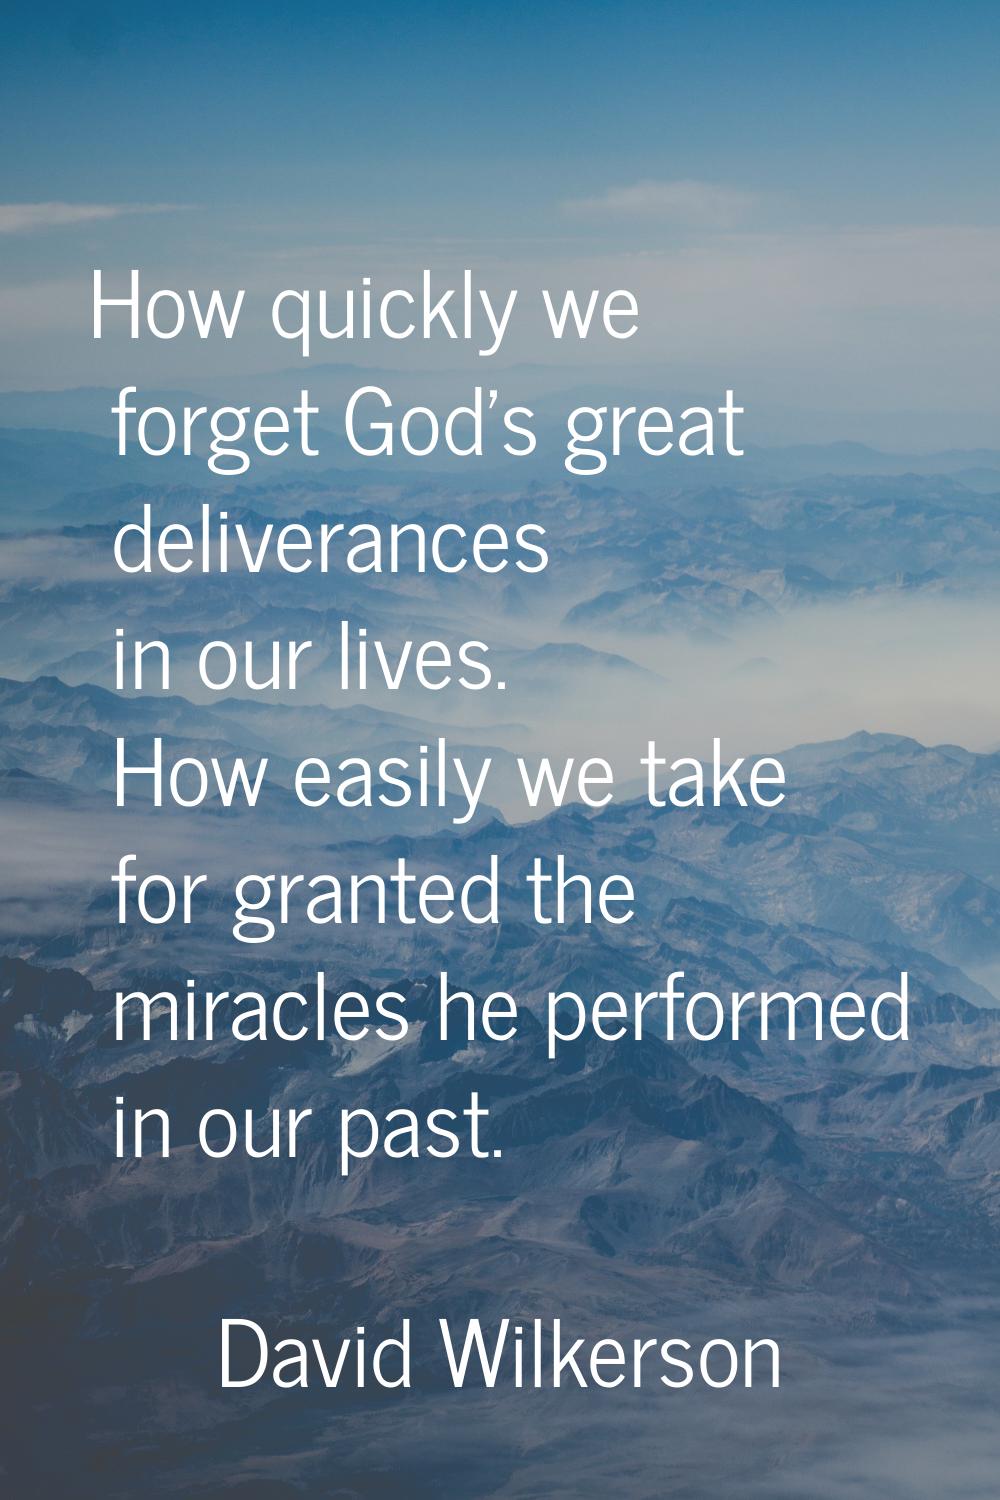 How quickly we forget God's great deliverances in our lives. How easily we take for granted the mir